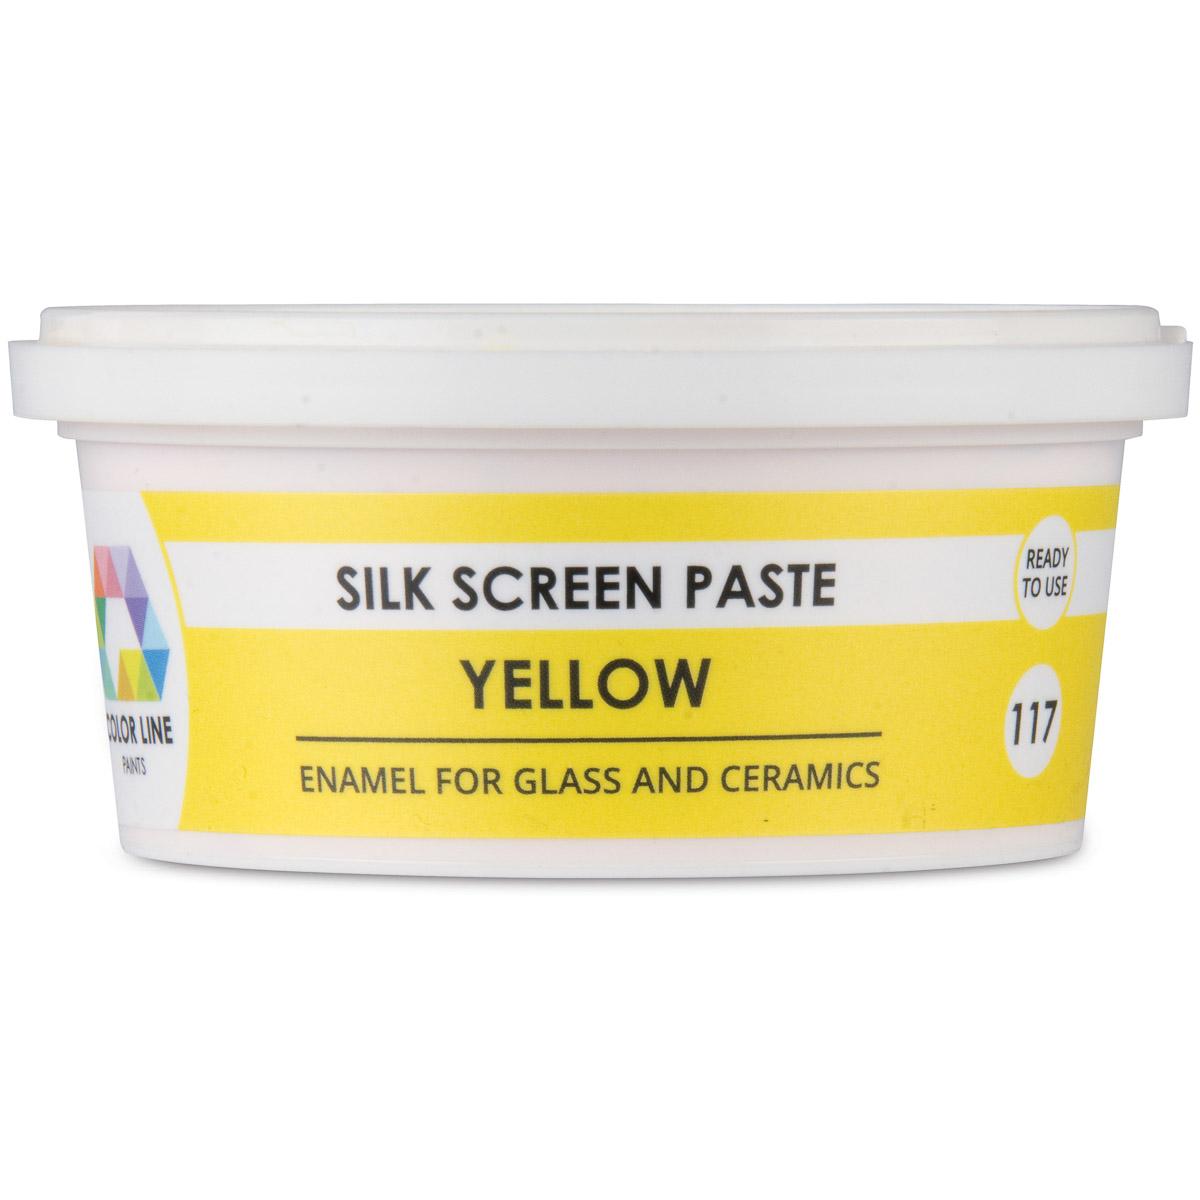 YELLOW COLOR LINE SILK SCREEN PASTE by BULLSEYE GLASS